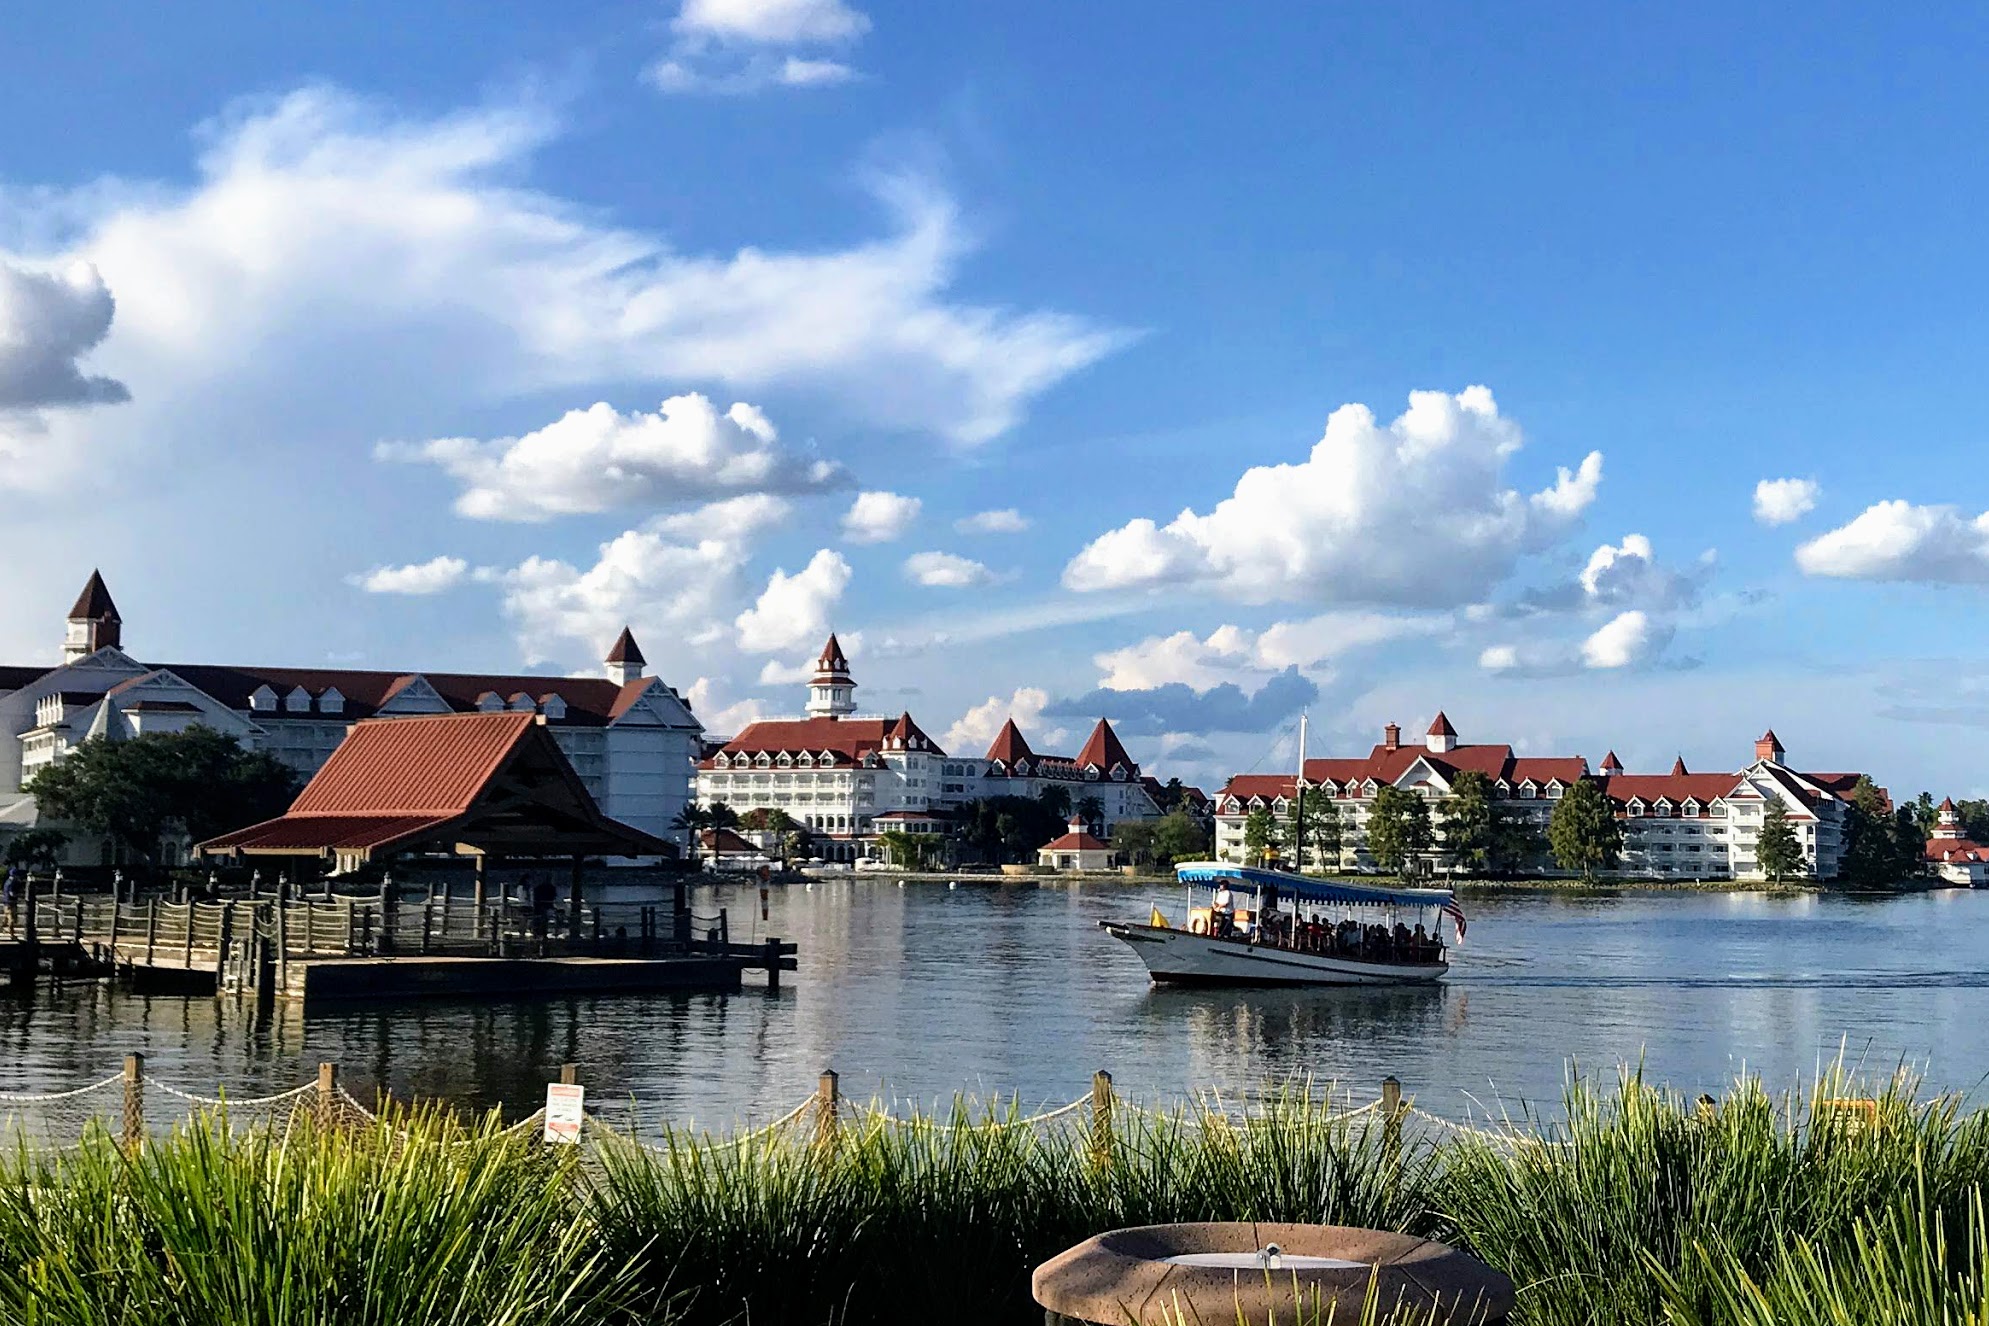 How do you visit Disney World resorts right now?